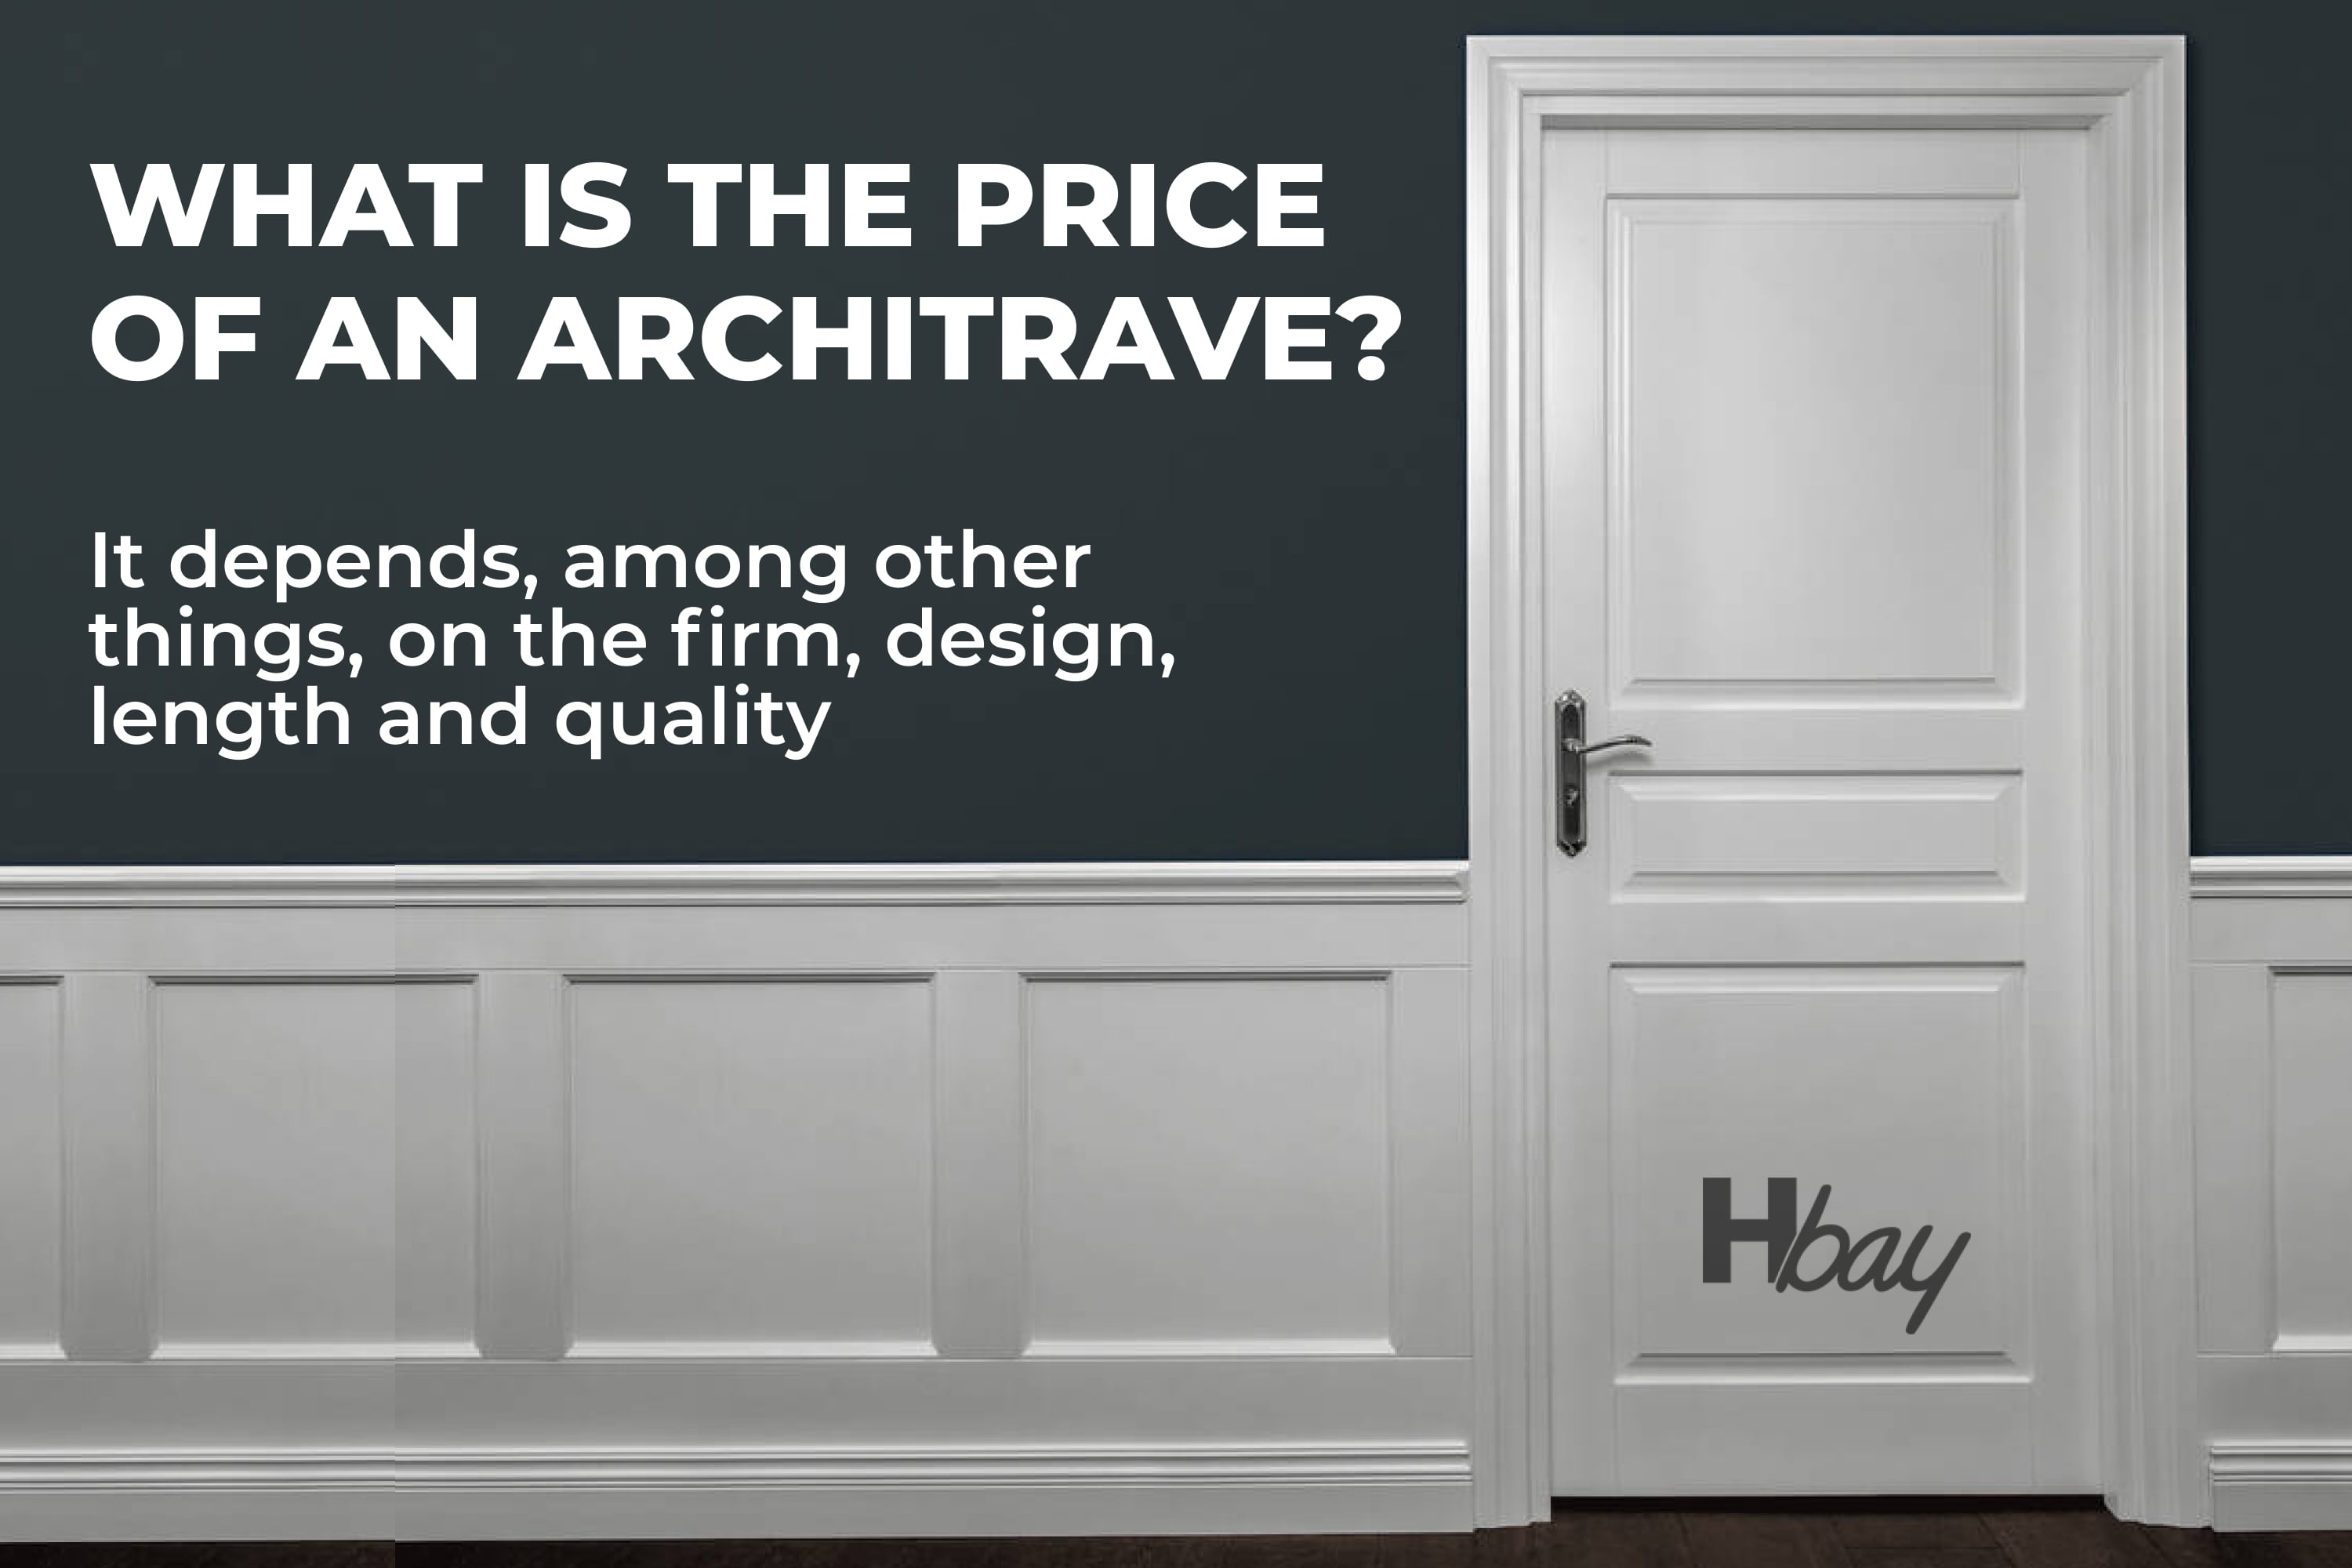 What is the price of an architrave